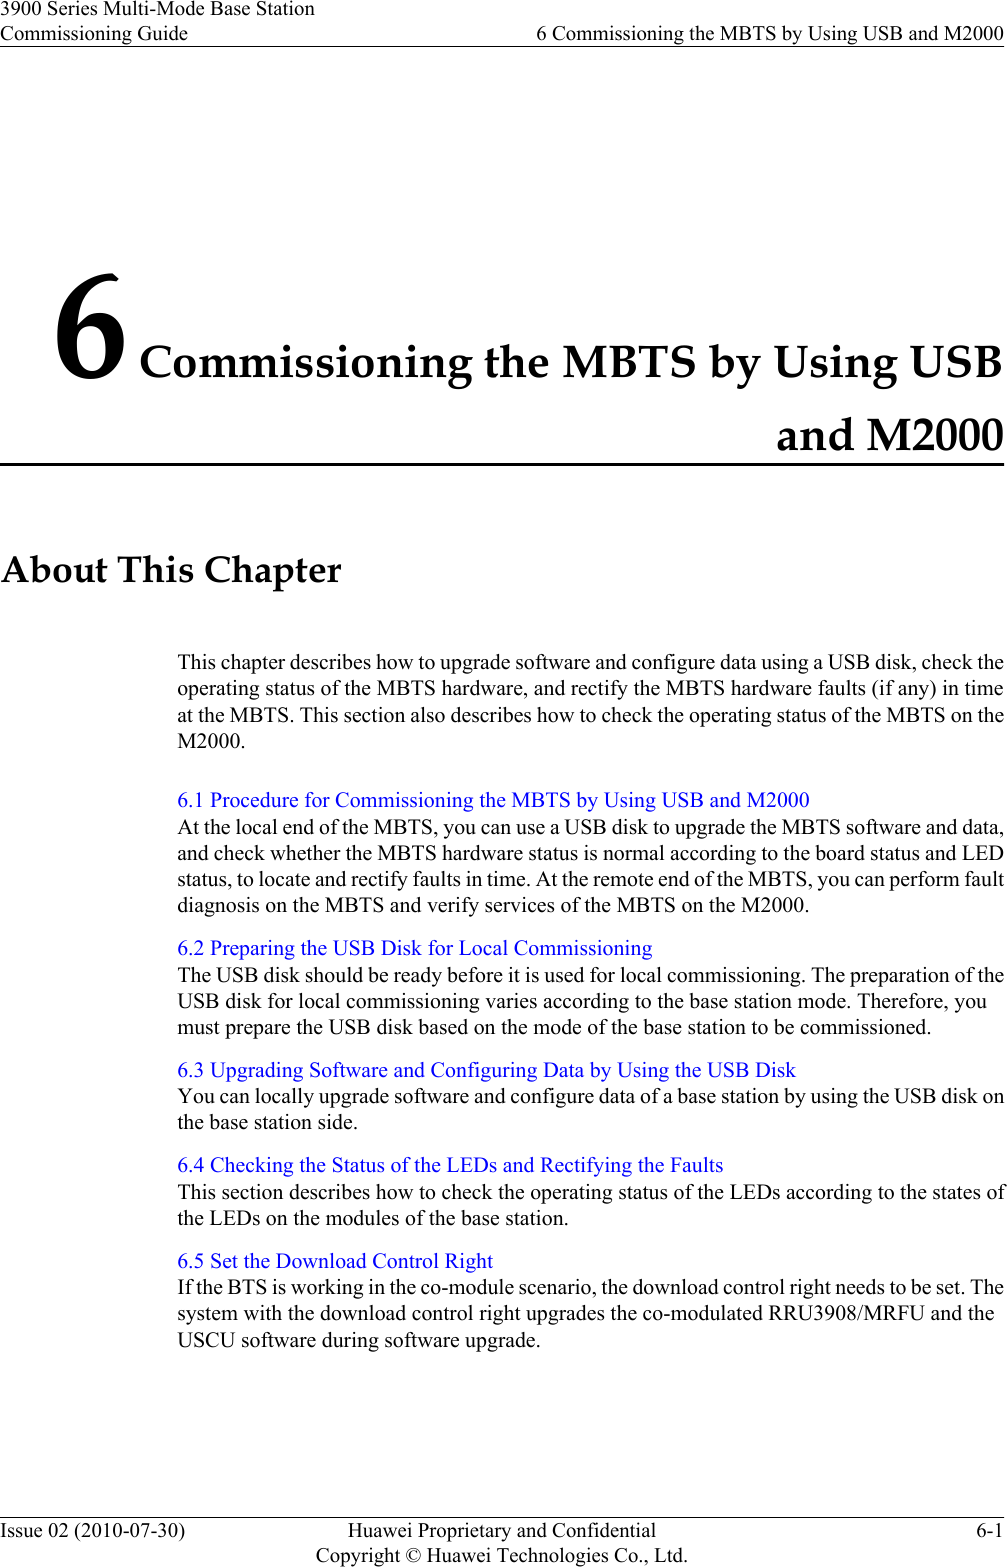 6 Commissioning the MBTS by Using USBand M2000About This ChapterThis chapter describes how to upgrade software and configure data using a USB disk, check theoperating status of the MBTS hardware, and rectify the MBTS hardware faults (if any) in timeat the MBTS. This section also describes how to check the operating status of the MBTS on theM2000.6.1 Procedure for Commissioning the MBTS by Using USB and M2000At the local end of the MBTS, you can use a USB disk to upgrade the MBTS software and data,and check whether the MBTS hardware status is normal according to the board status and LEDstatus, to locate and rectify faults in time. At the remote end of the MBTS, you can perform faultdiagnosis on the MBTS and verify services of the MBTS on the M2000.6.2 Preparing the USB Disk for Local CommissioningThe USB disk should be ready before it is used for local commissioning. The preparation of theUSB disk for local commissioning varies according to the base station mode. Therefore, youmust prepare the USB disk based on the mode of the base station to be commissioned.6.3 Upgrading Software and Configuring Data by Using the USB DiskYou can locally upgrade software and configure data of a base station by using the USB disk onthe base station side.6.4 Checking the Status of the LEDs and Rectifying the FaultsThis section describes how to check the operating status of the LEDs according to the states ofthe LEDs on the modules of the base station.6.5 Set the Download Control RightIf the BTS is working in the co-module scenario, the download control right needs to be set. Thesystem with the download control right upgrades the co-modulated RRU3908/MRFU and theUSCU software during software upgrade.3900 Series Multi-Mode Base StationCommissioning Guide 6 Commissioning the MBTS by Using USB and M2000Issue 02 (2010-07-30) Huawei Proprietary and ConfidentialCopyright © Huawei Technologies Co., Ltd.6-1